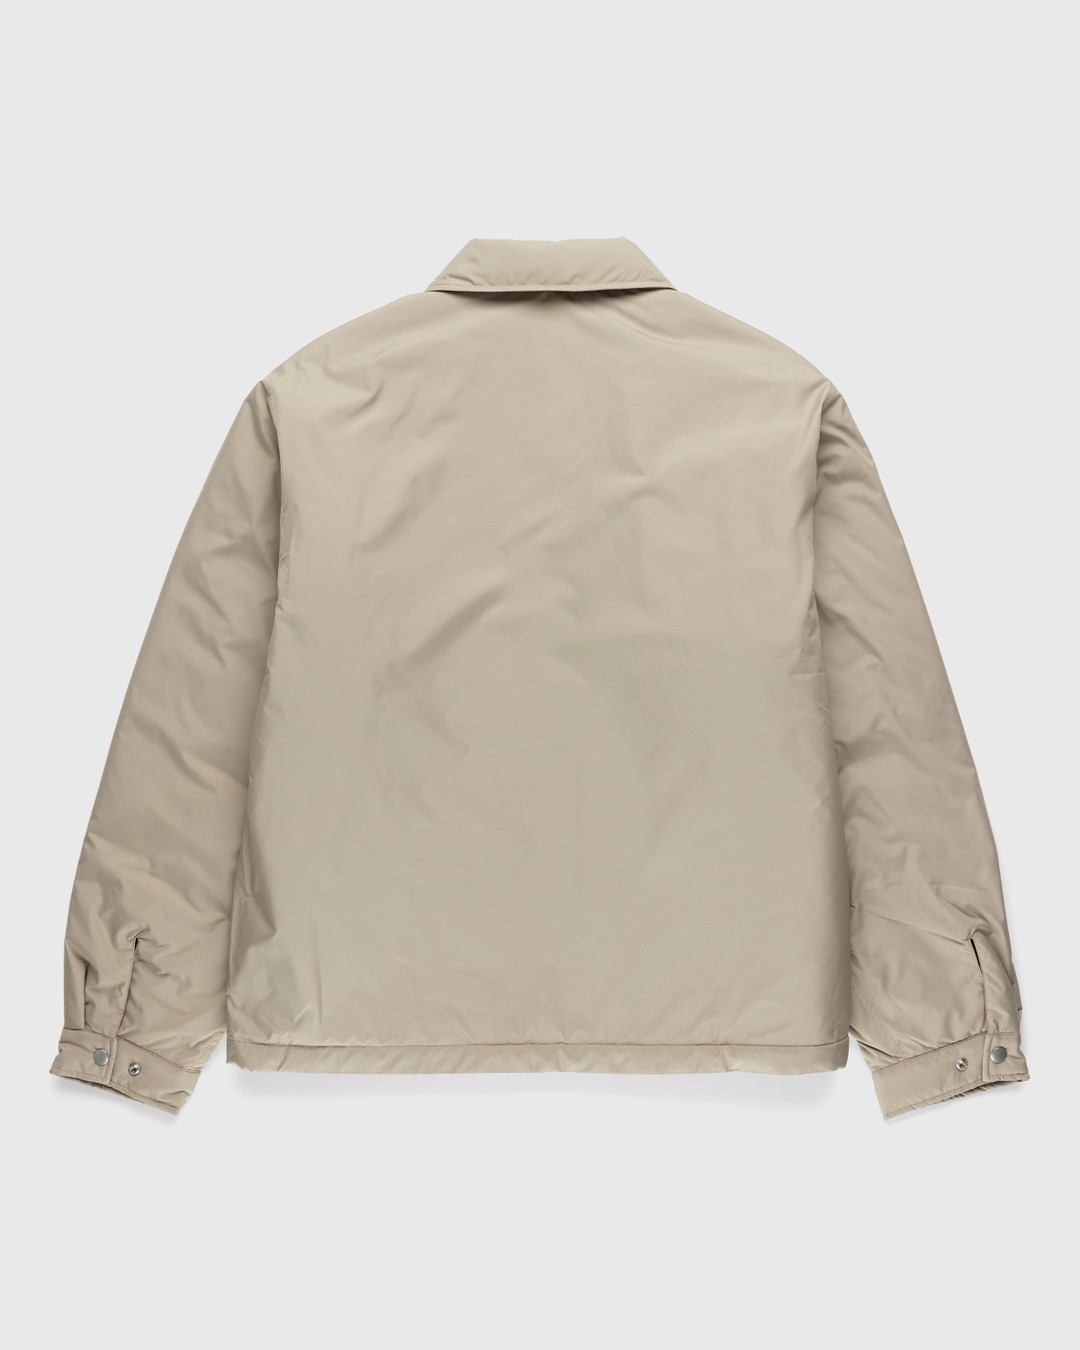 Highsnobiety HS05 – Light Insulated Eco-Poly Jacket Beige - Outerwear - Beige - Image 2